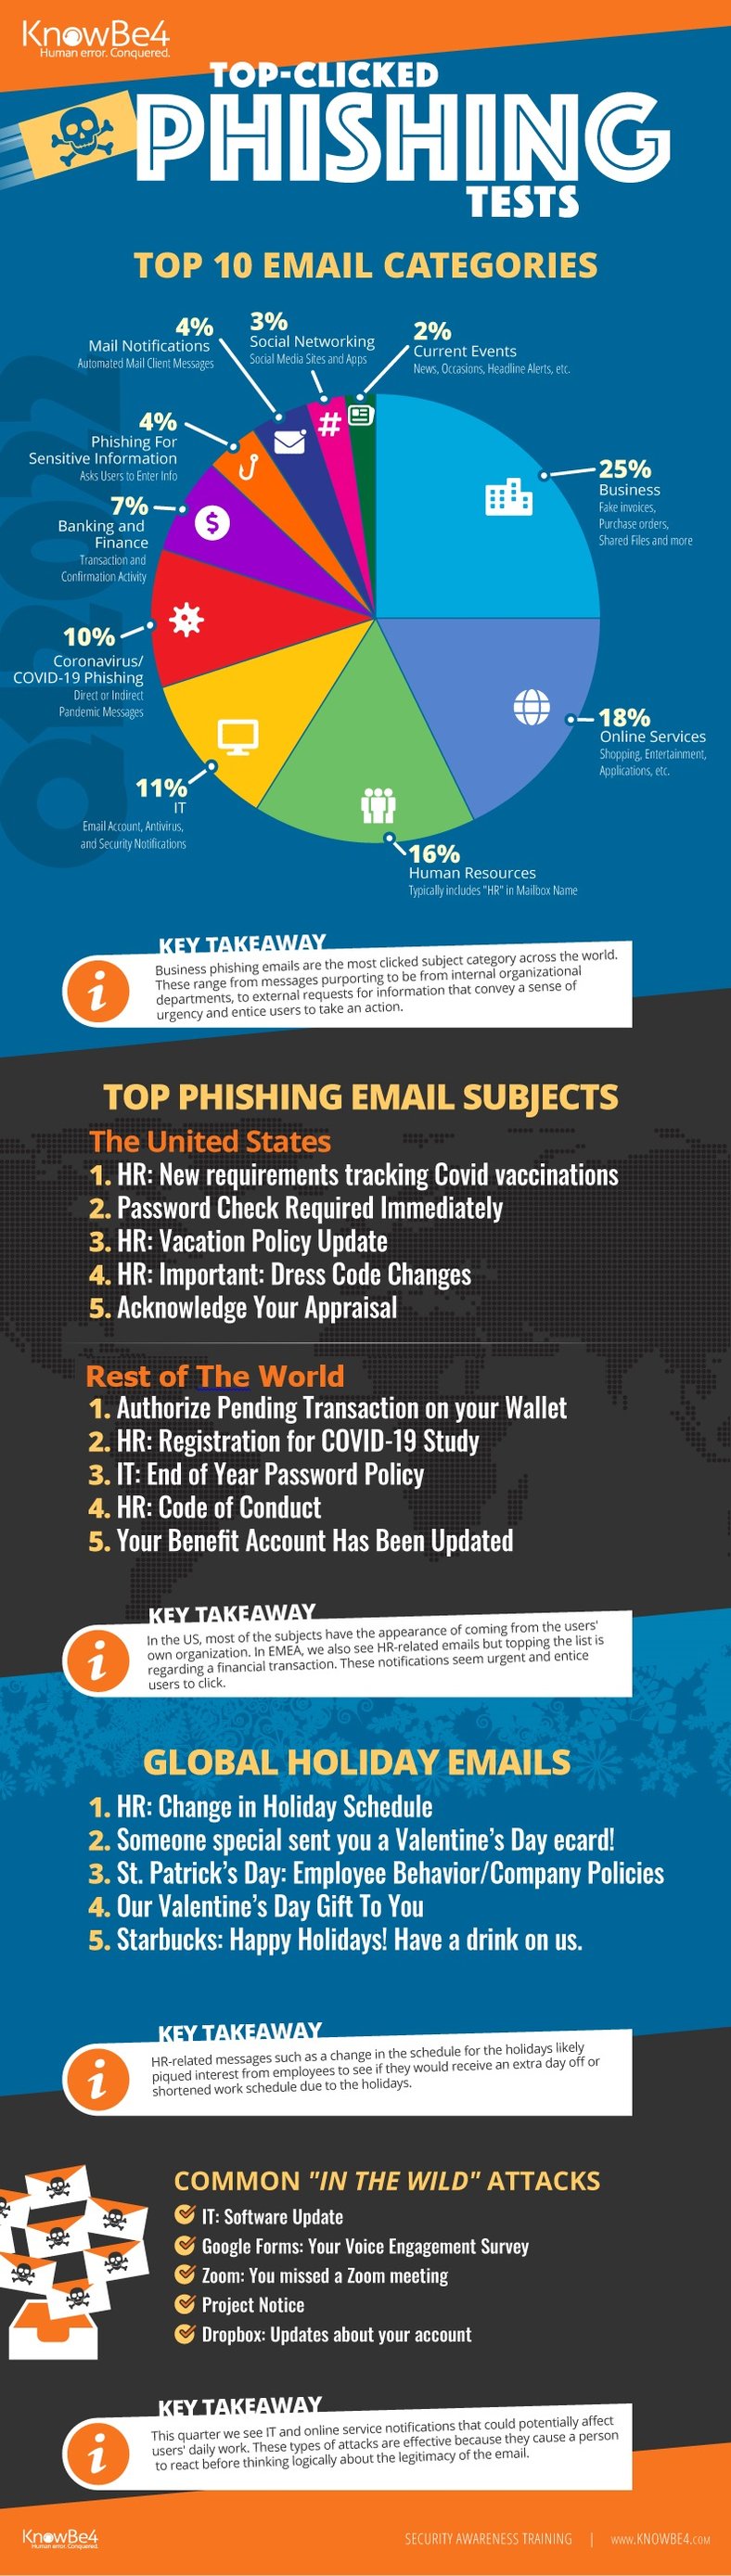 KnowBe4 Q1 2022 Top-Clicked Phishing Report